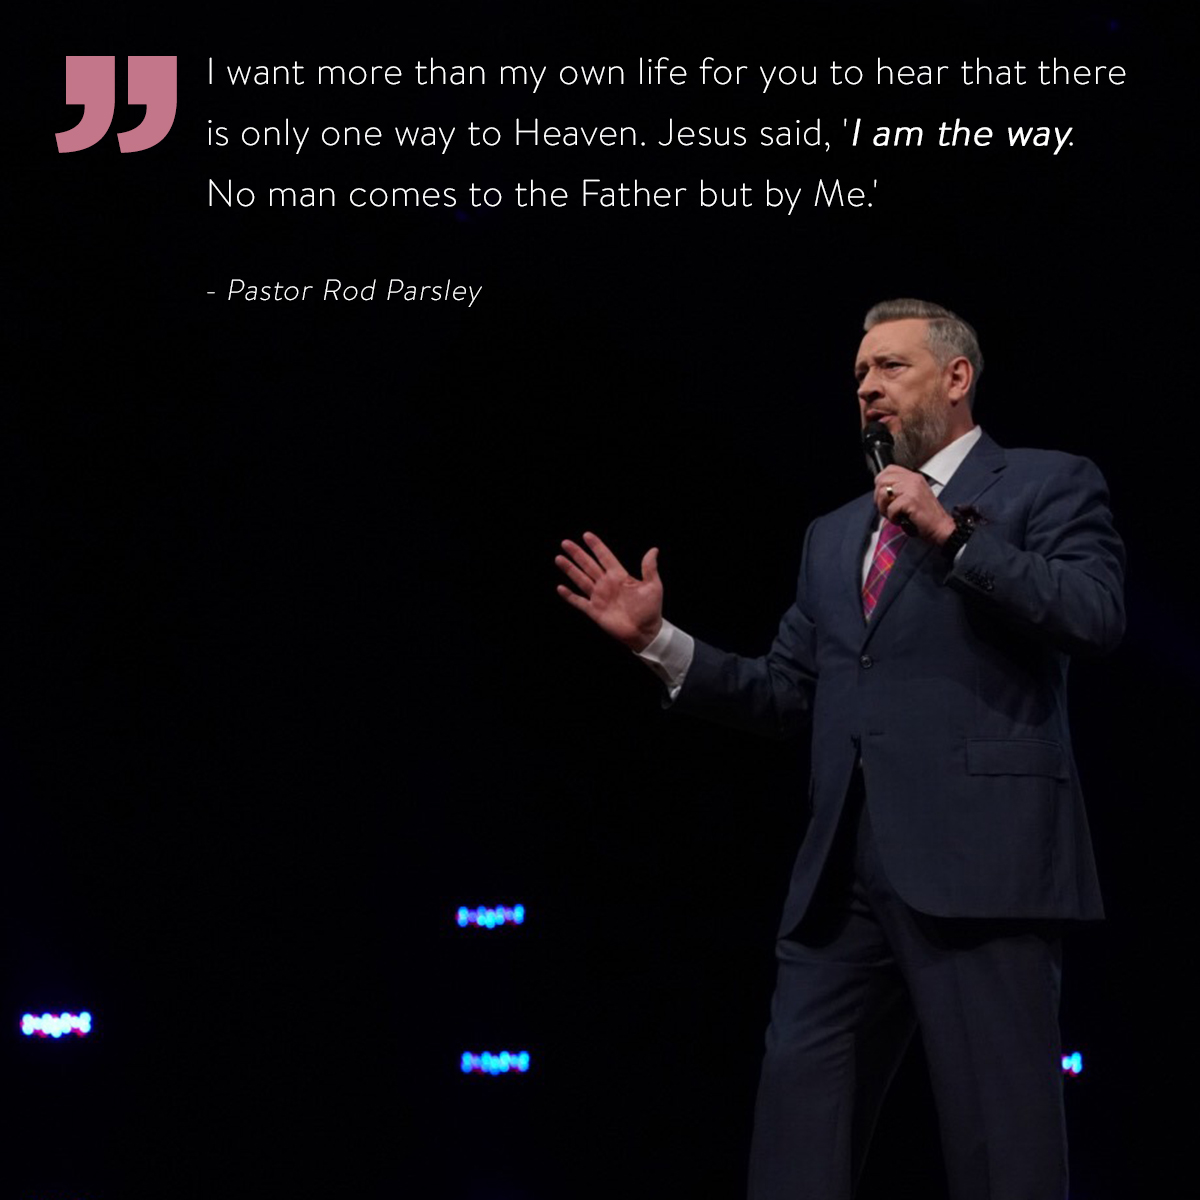 “I want more than my own life for you to hear that there is only one way to Heaven. Jesus said, 'I am the way. No man comes to the Father but by Me.” – Pastor Rod Parsley